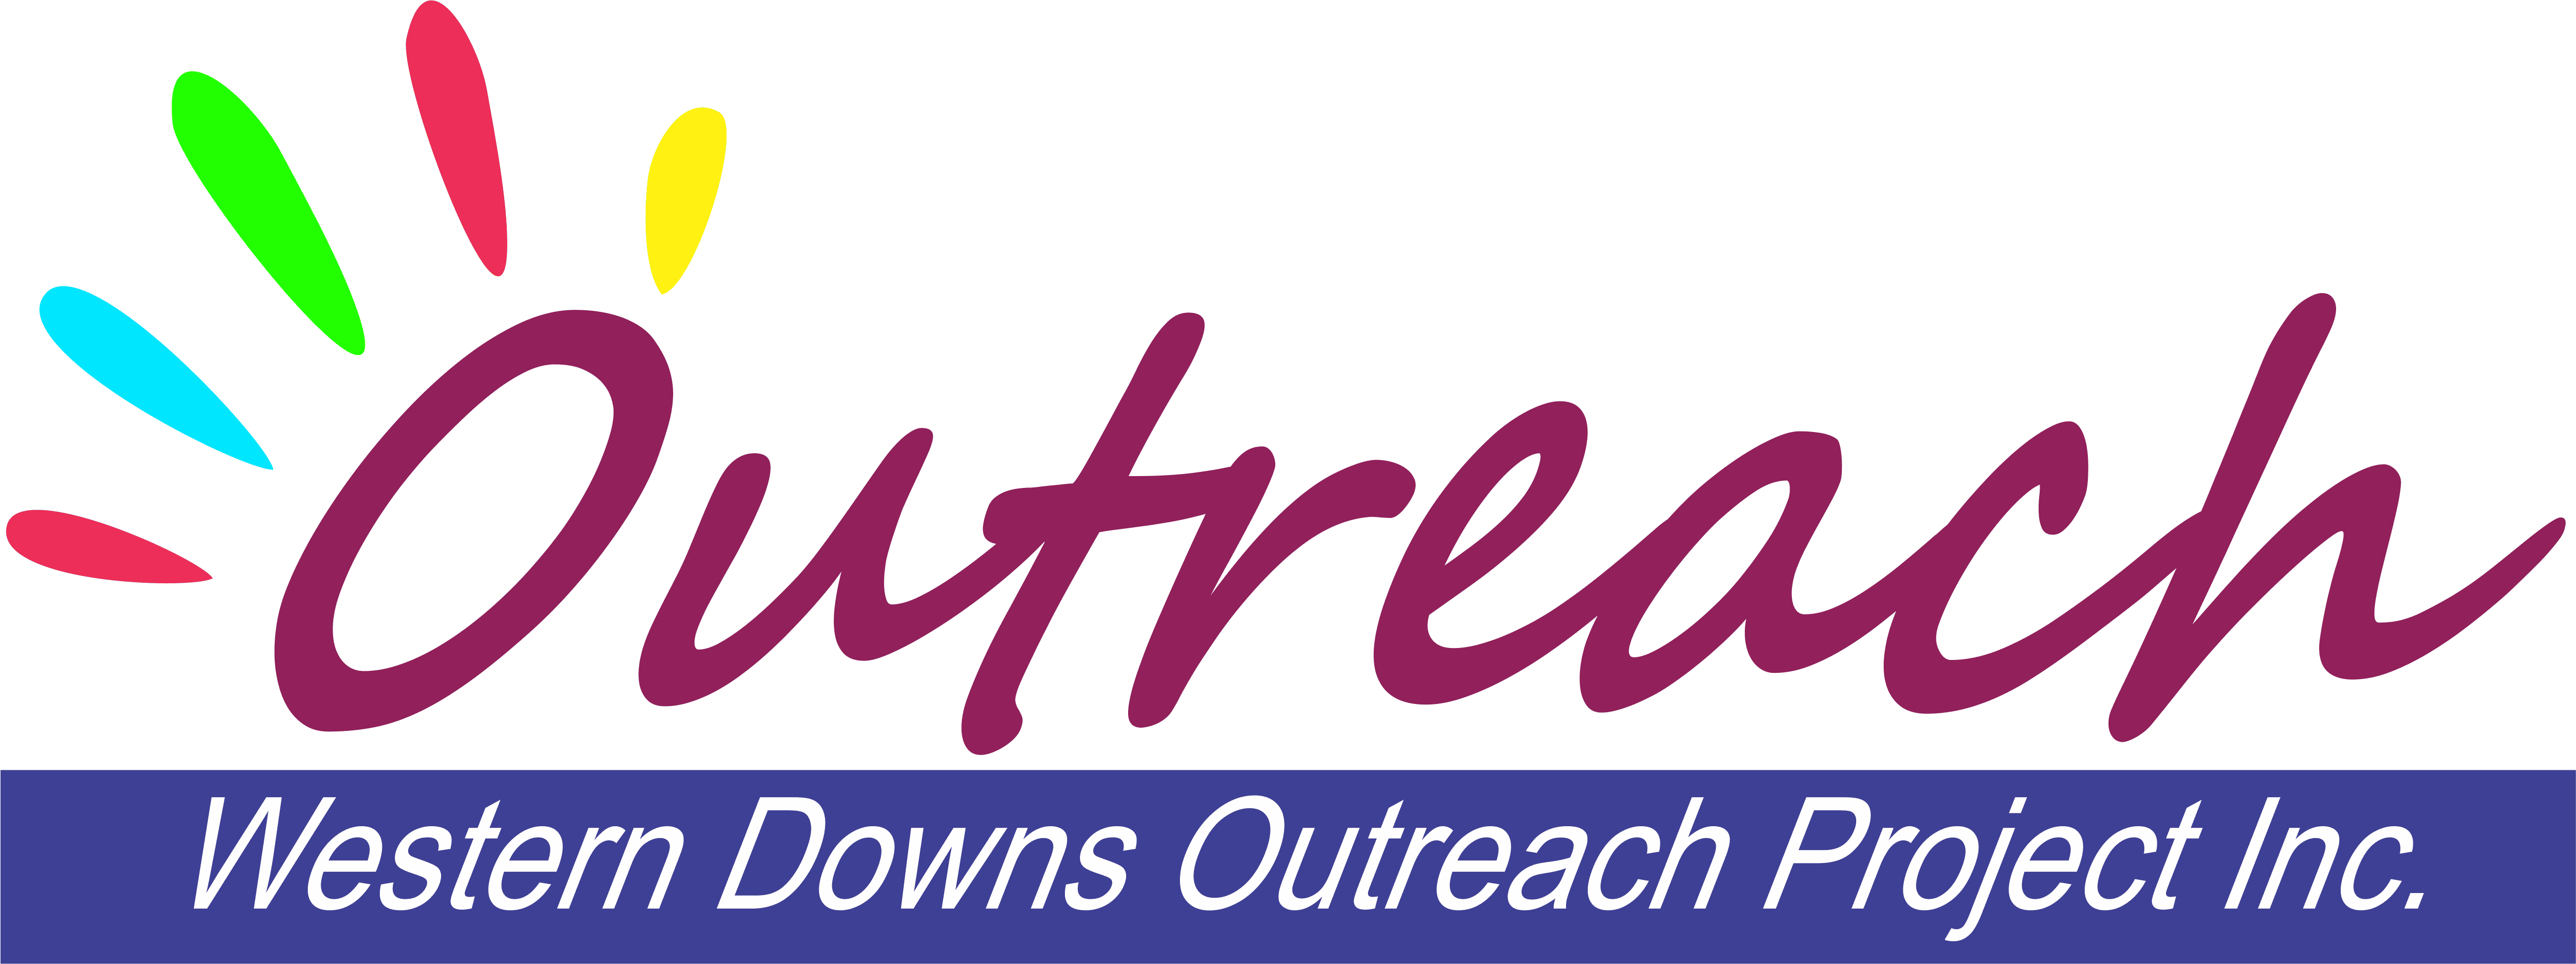 Western Downs Outreach Project Inc. logo